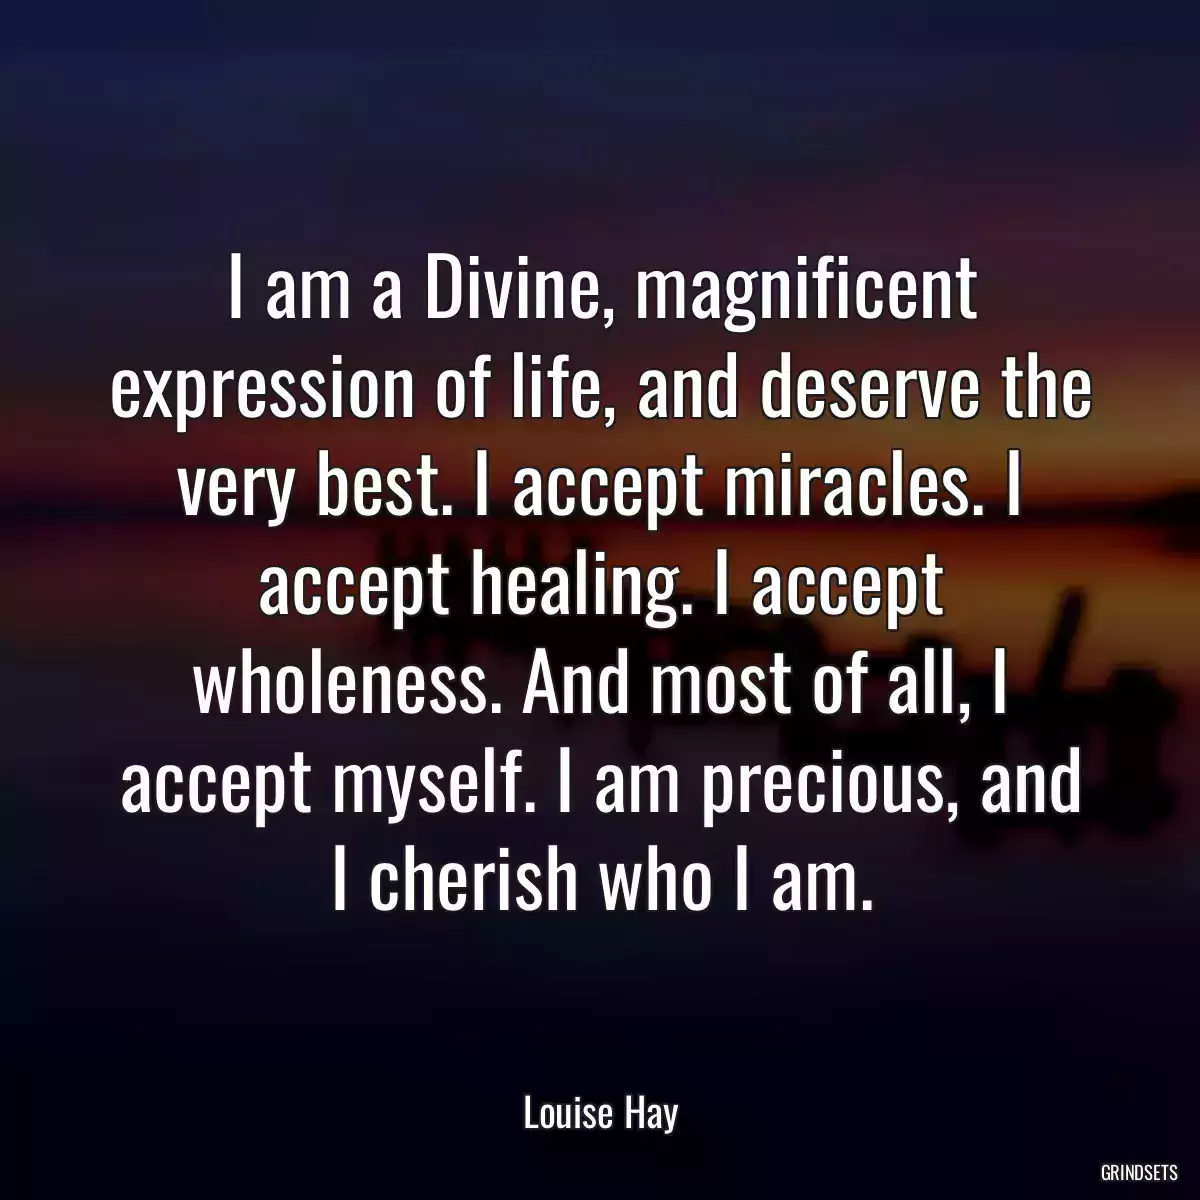 I am a Divine, magnificent expression of life, and deserve the very best. I accept miracles. I accept healing. I accept wholeness. And most of all, I accept myself. I am precious, and I cherish who I am.